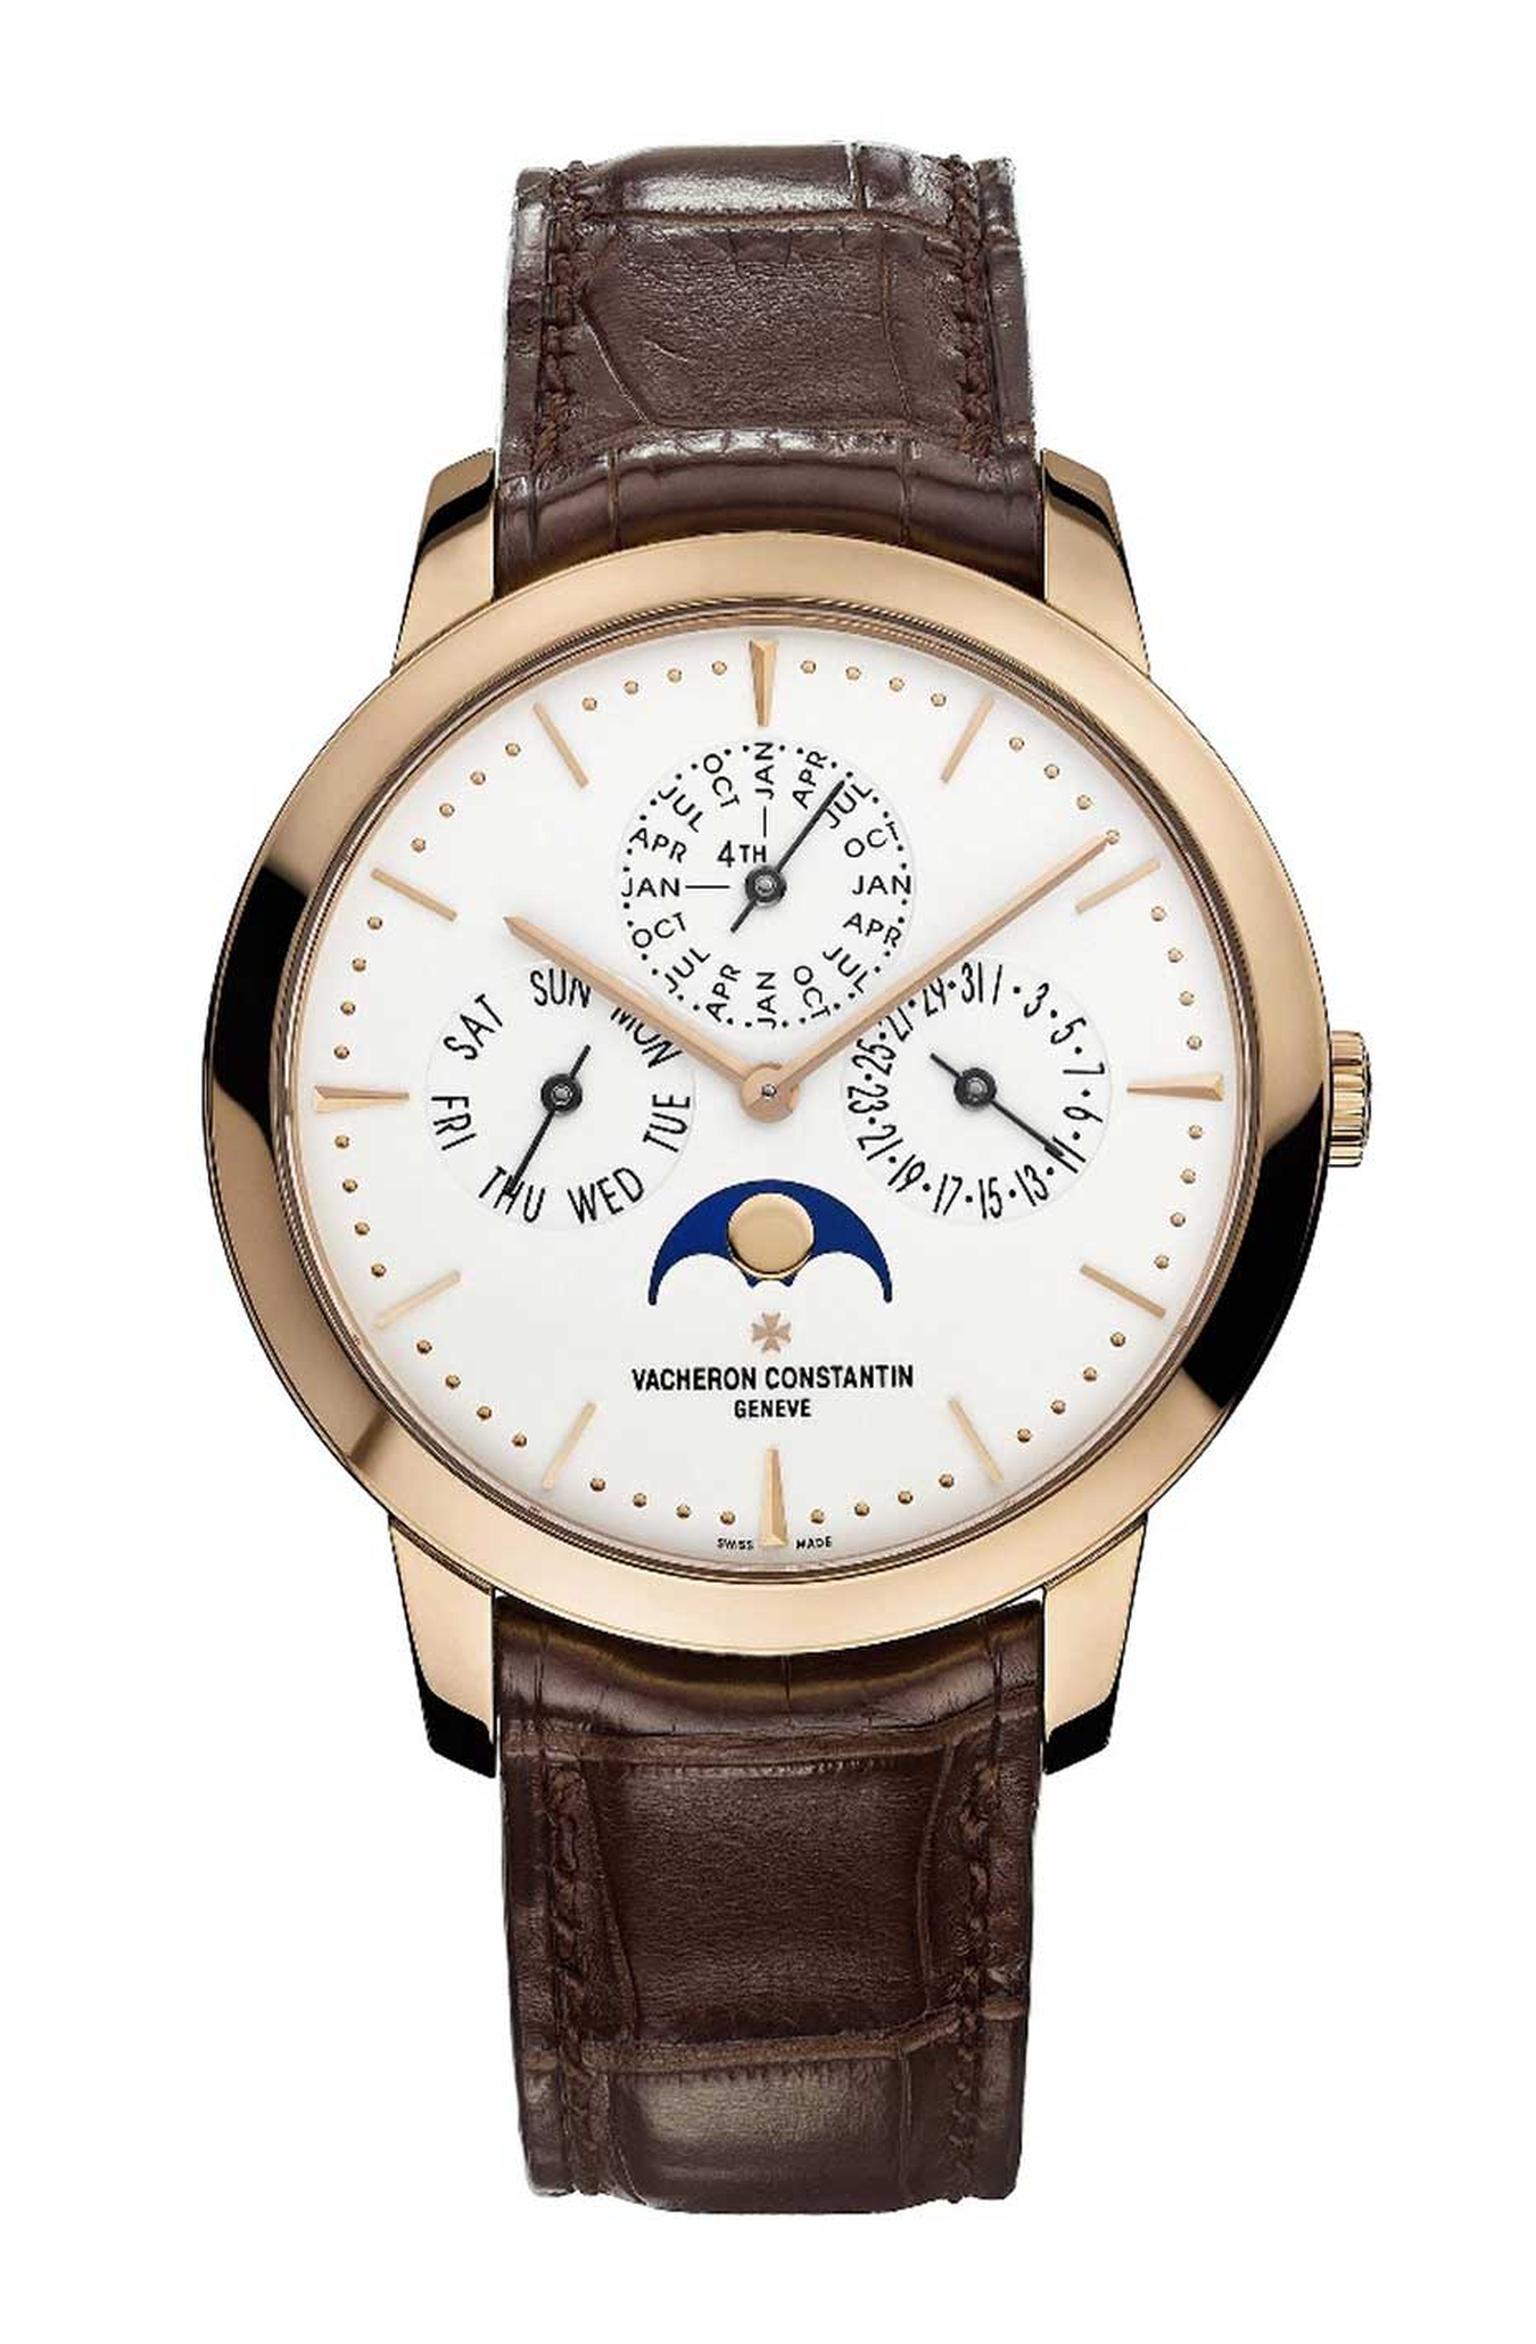 Vacheron Constantin, the world's oldest watchmaker, is courting collectors at the SIAR Madrid with watches like this Patrimony Contemporaine Perpetual Calendar watch.